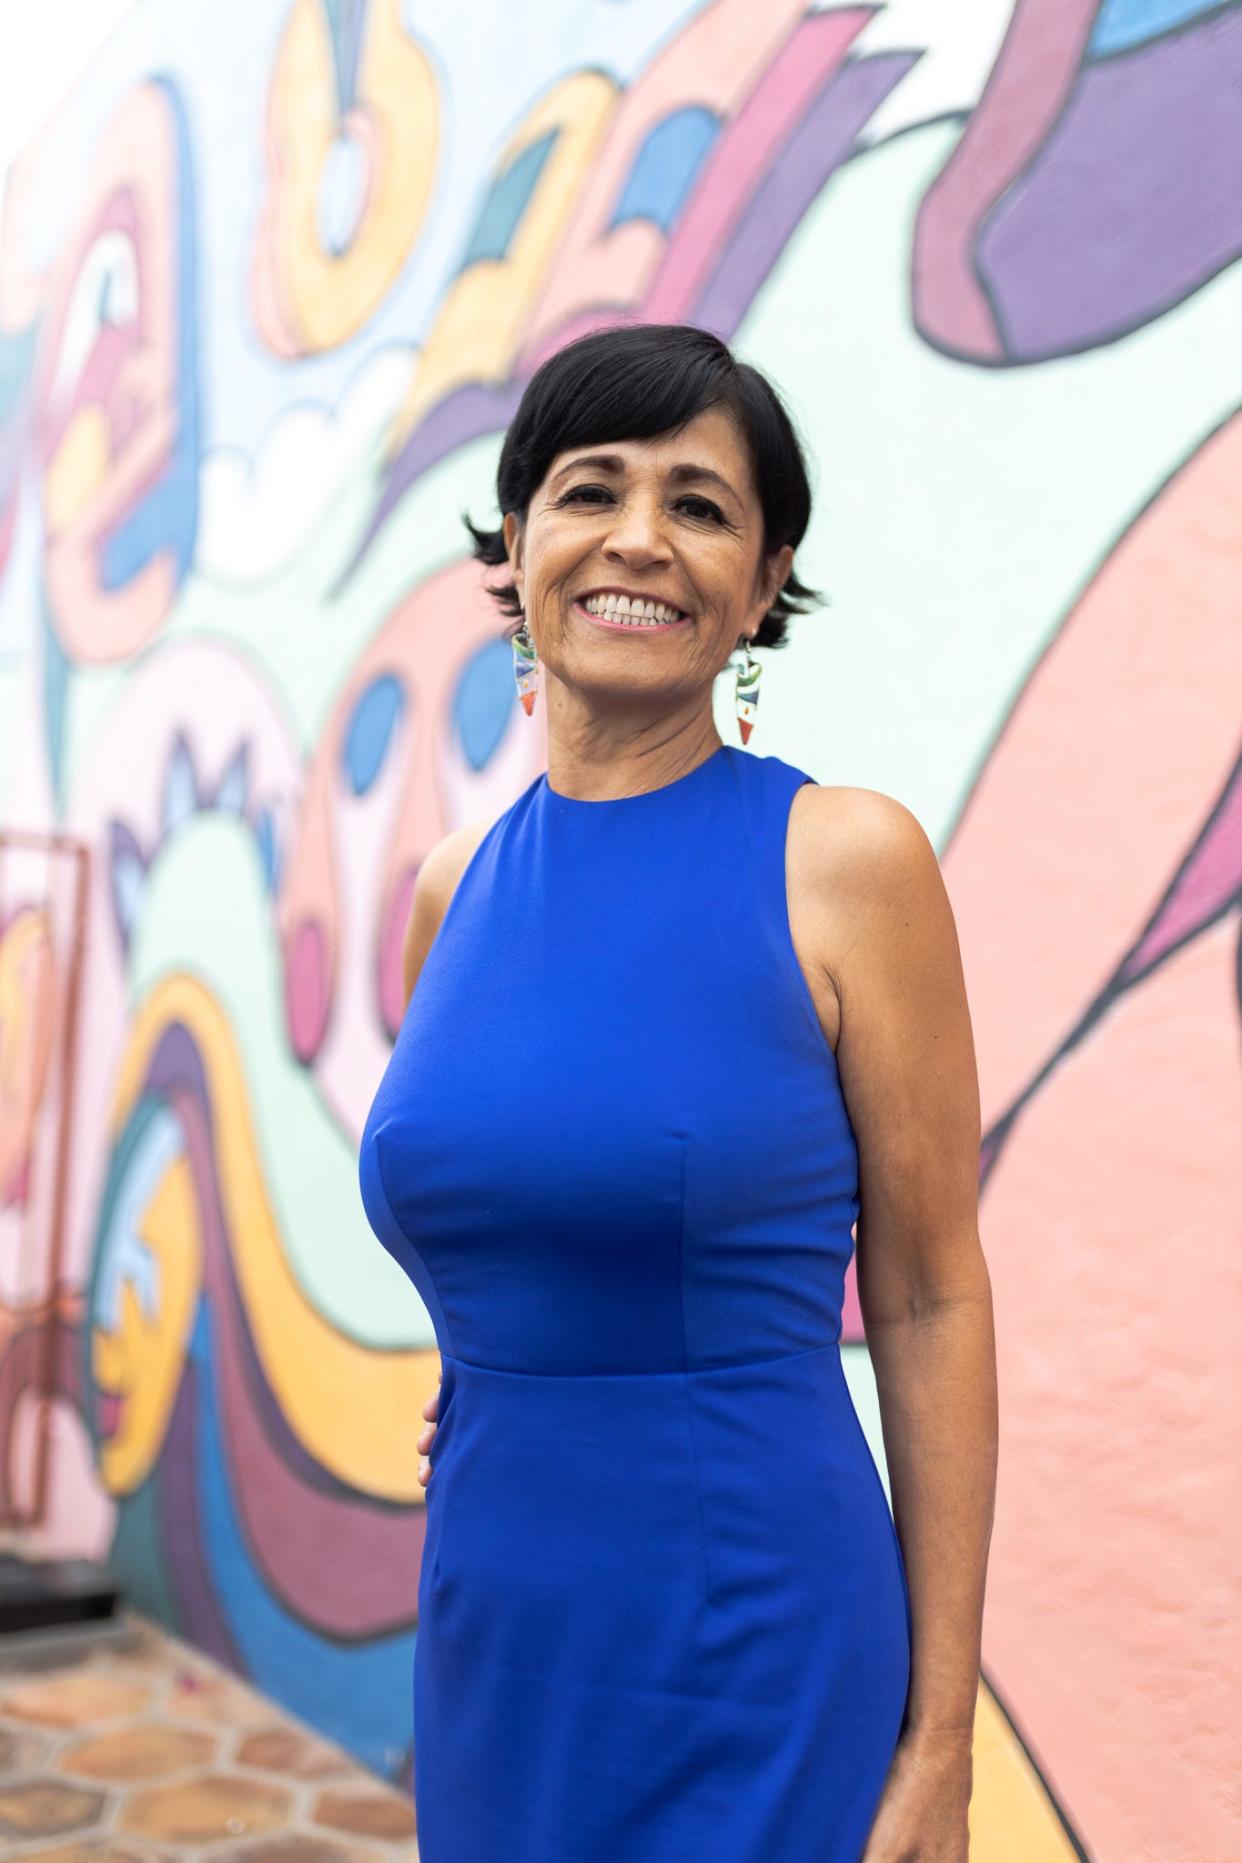 “The unknown causes fear,” said Yolima Otálora, Colombian immigrant. And that is why education about the different Latino communities and their contributions should be made available to all, she said. Only in this way can progress occur, she said.